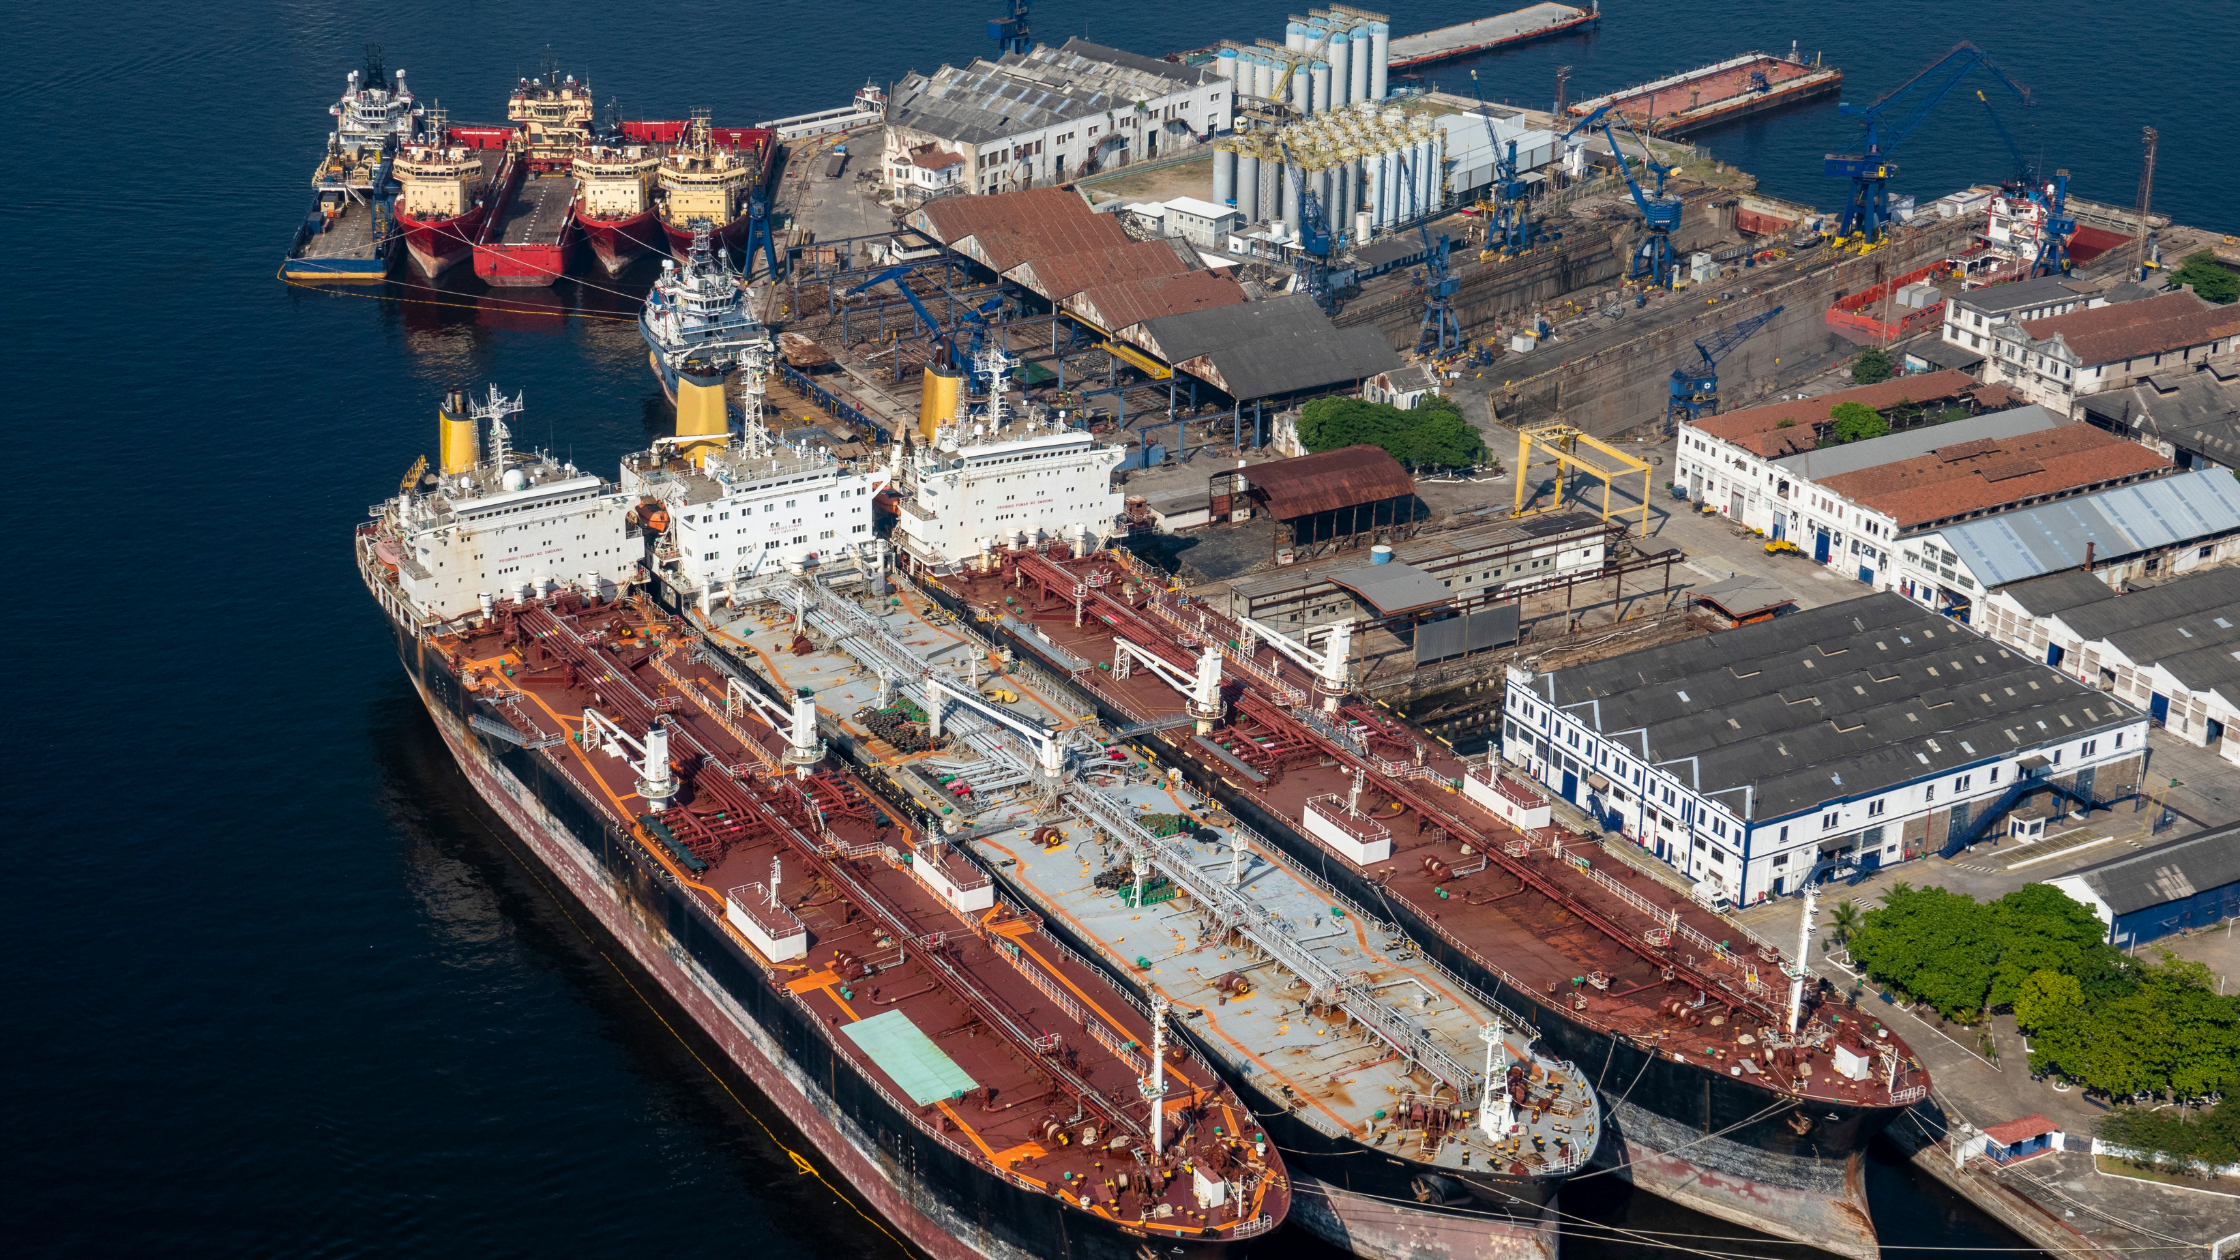 View of UK shipyard from above